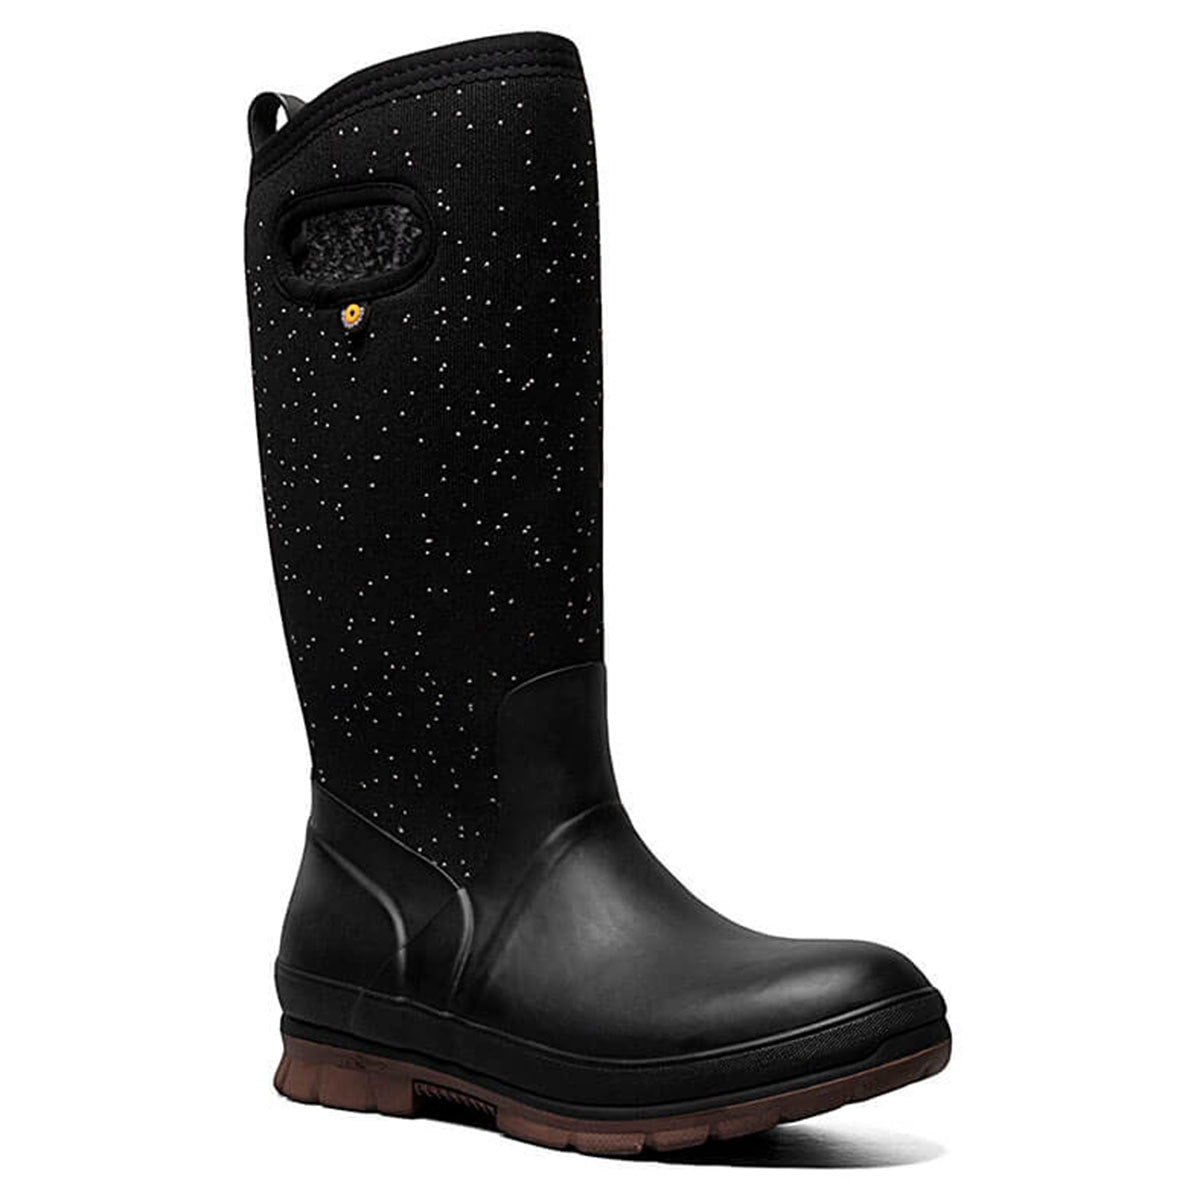 A black, knee-high Bogs Crandall Tall Speckle boot with a glittery upper and a slip-resistant outsole.